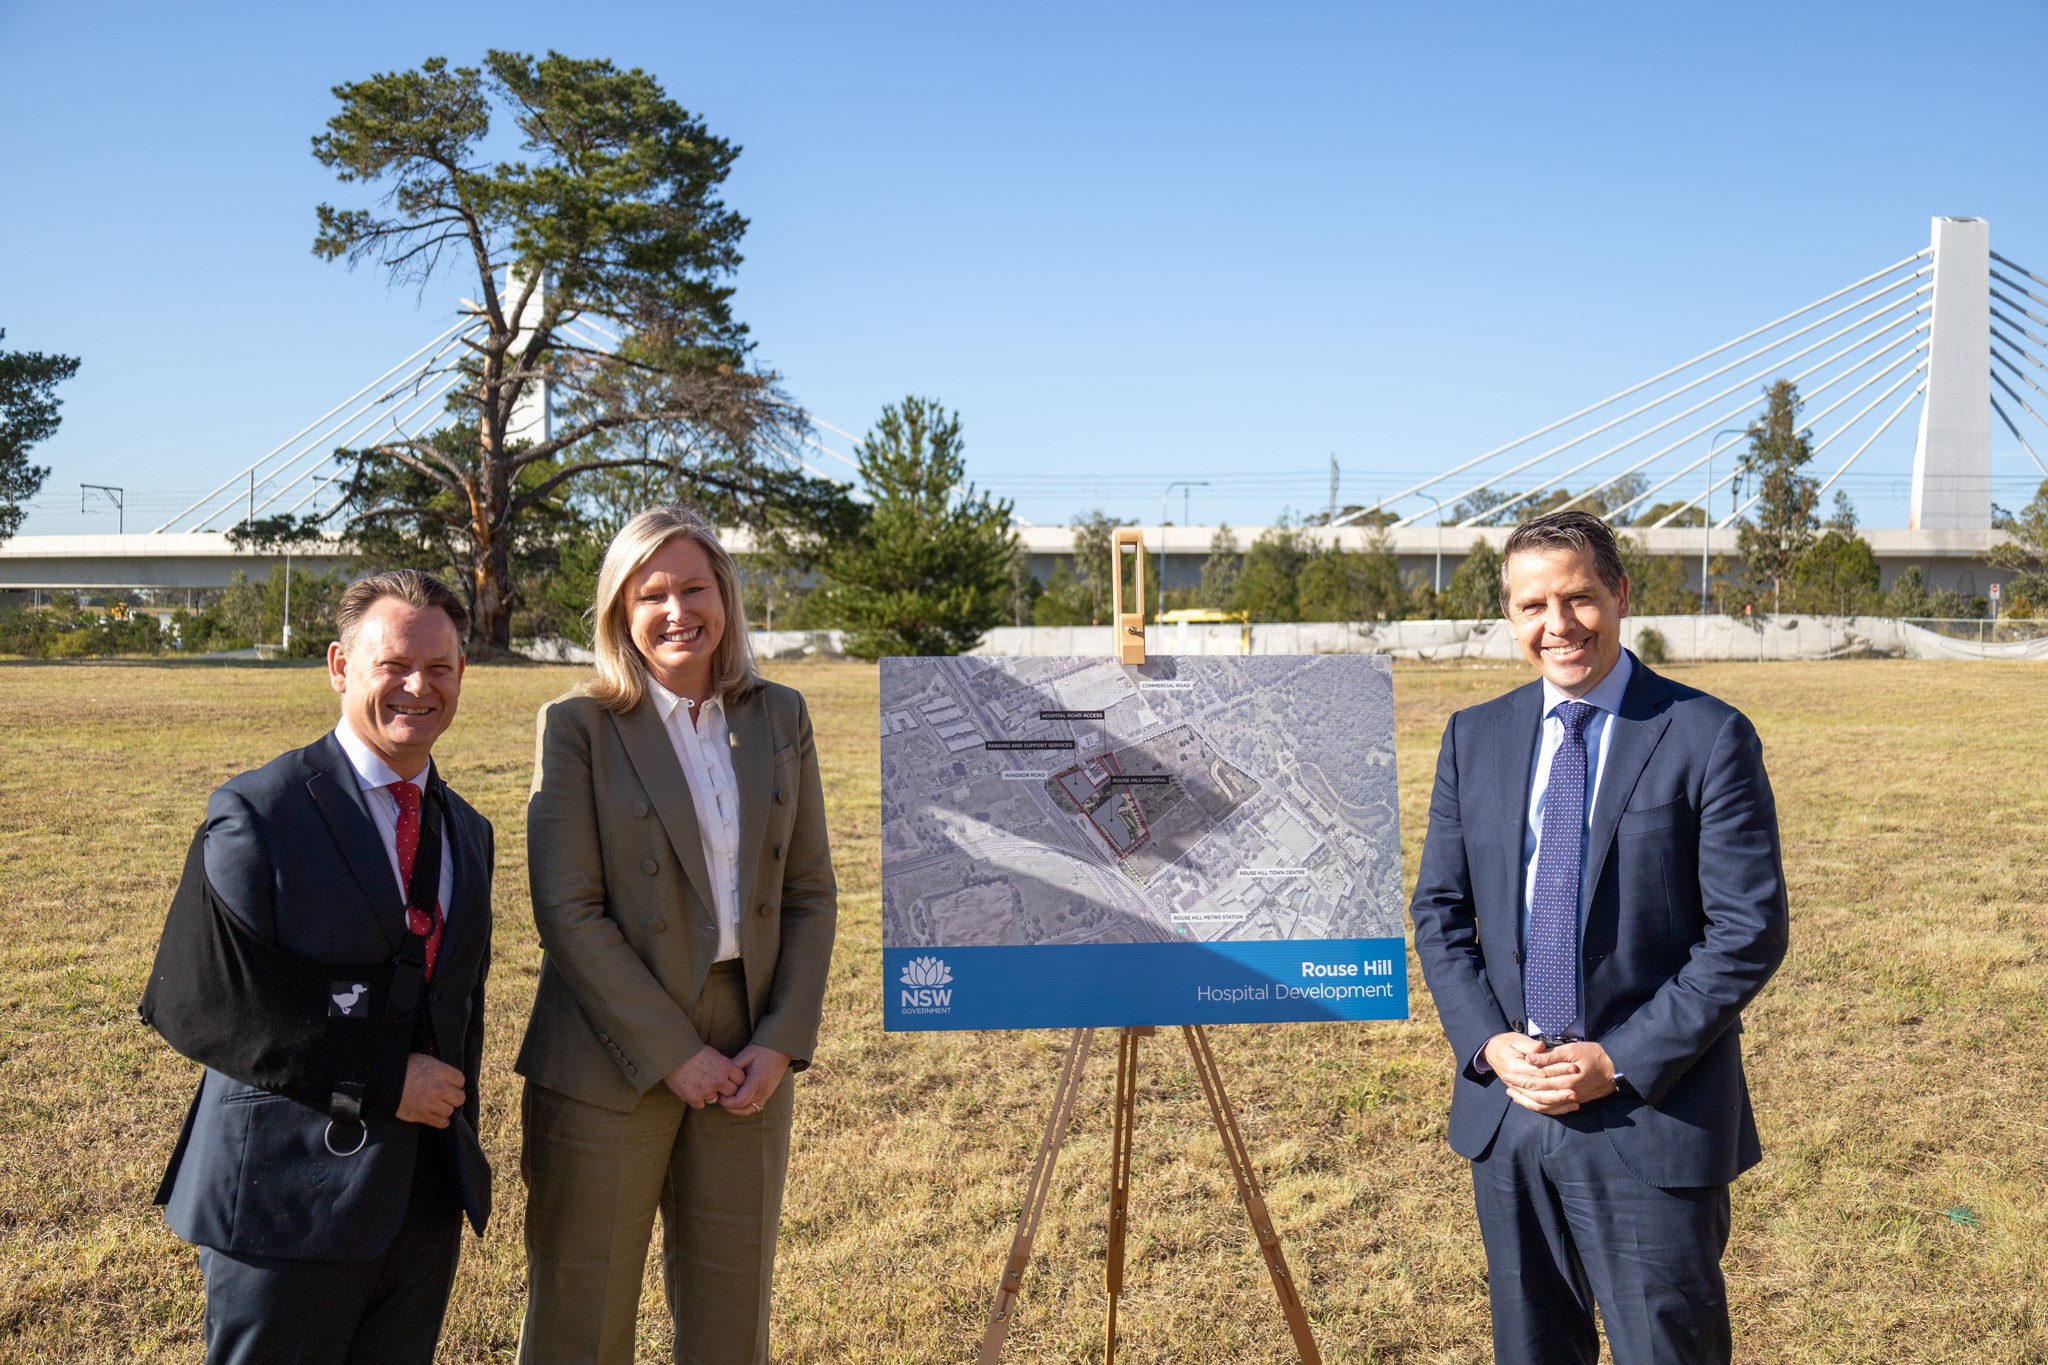 Community invited to get involved in enhanced $700 million Rouse Hill Hospital development